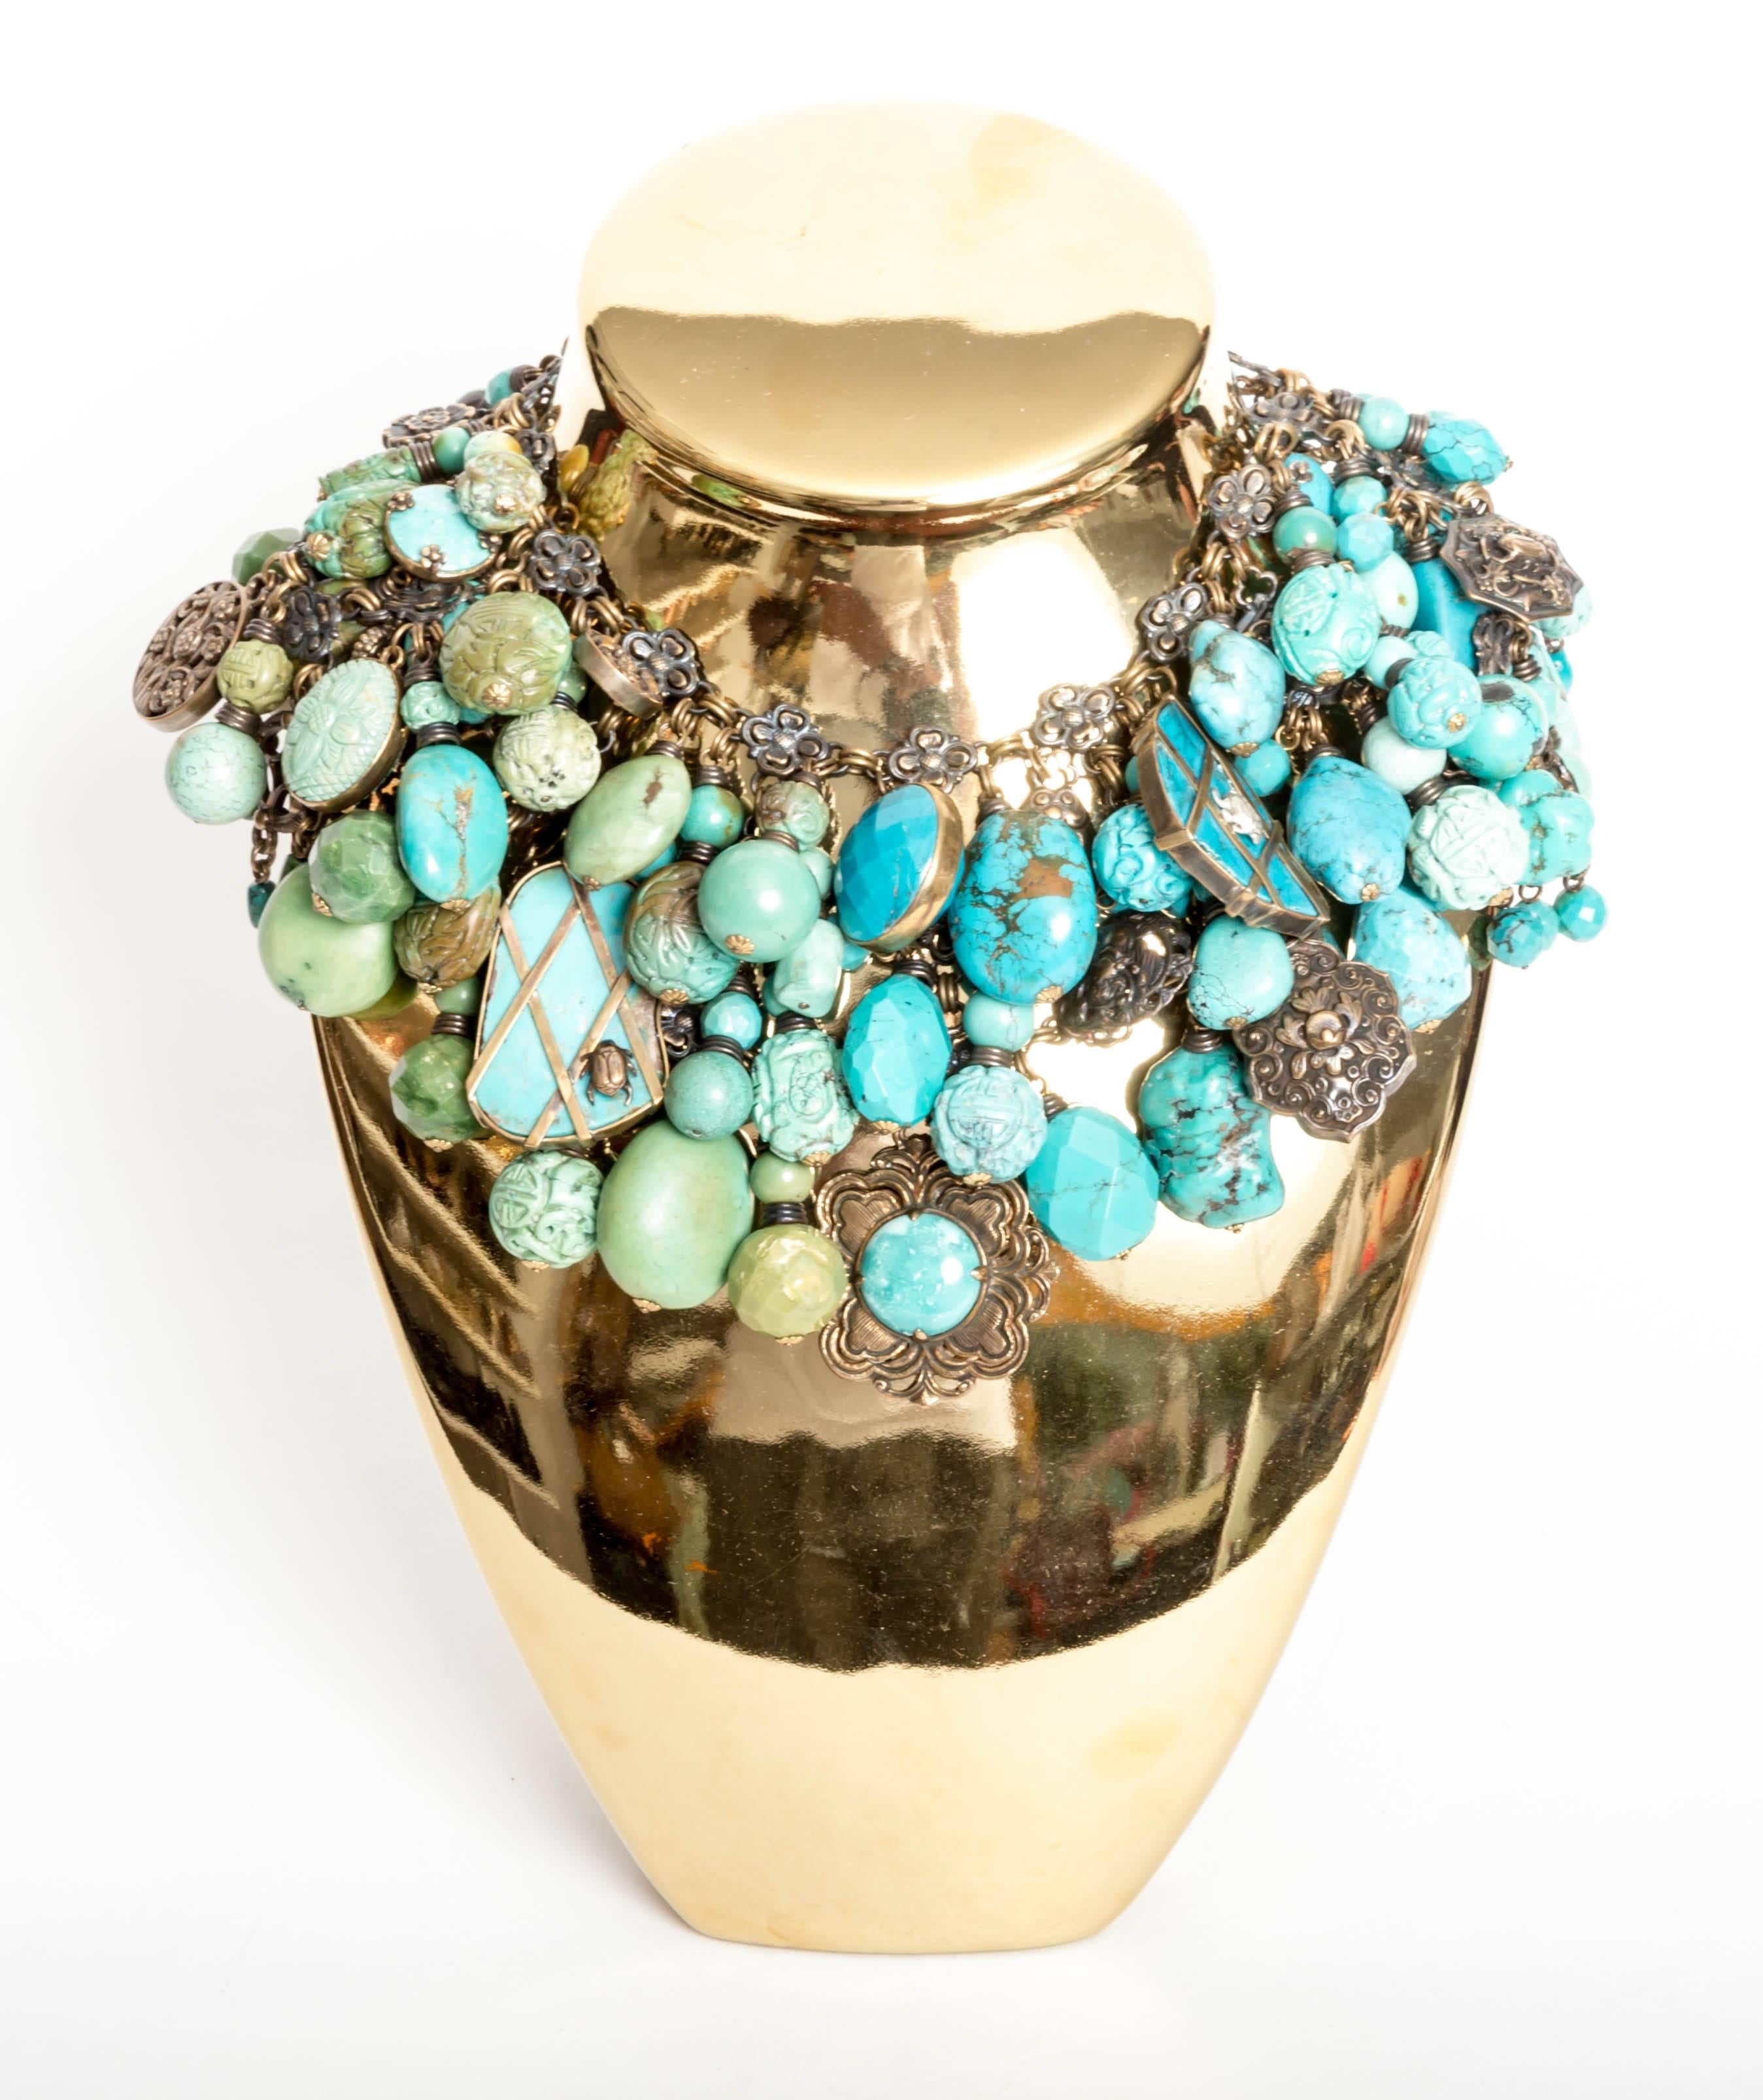 This huge bib necklace by Stephen Dweck is absolutely stunning.
Large textured beads fall from three rows of brass chains.
Carved, faceted and smooth beads comprise this wonderful piece.
This necklace weighs 810 grams.
